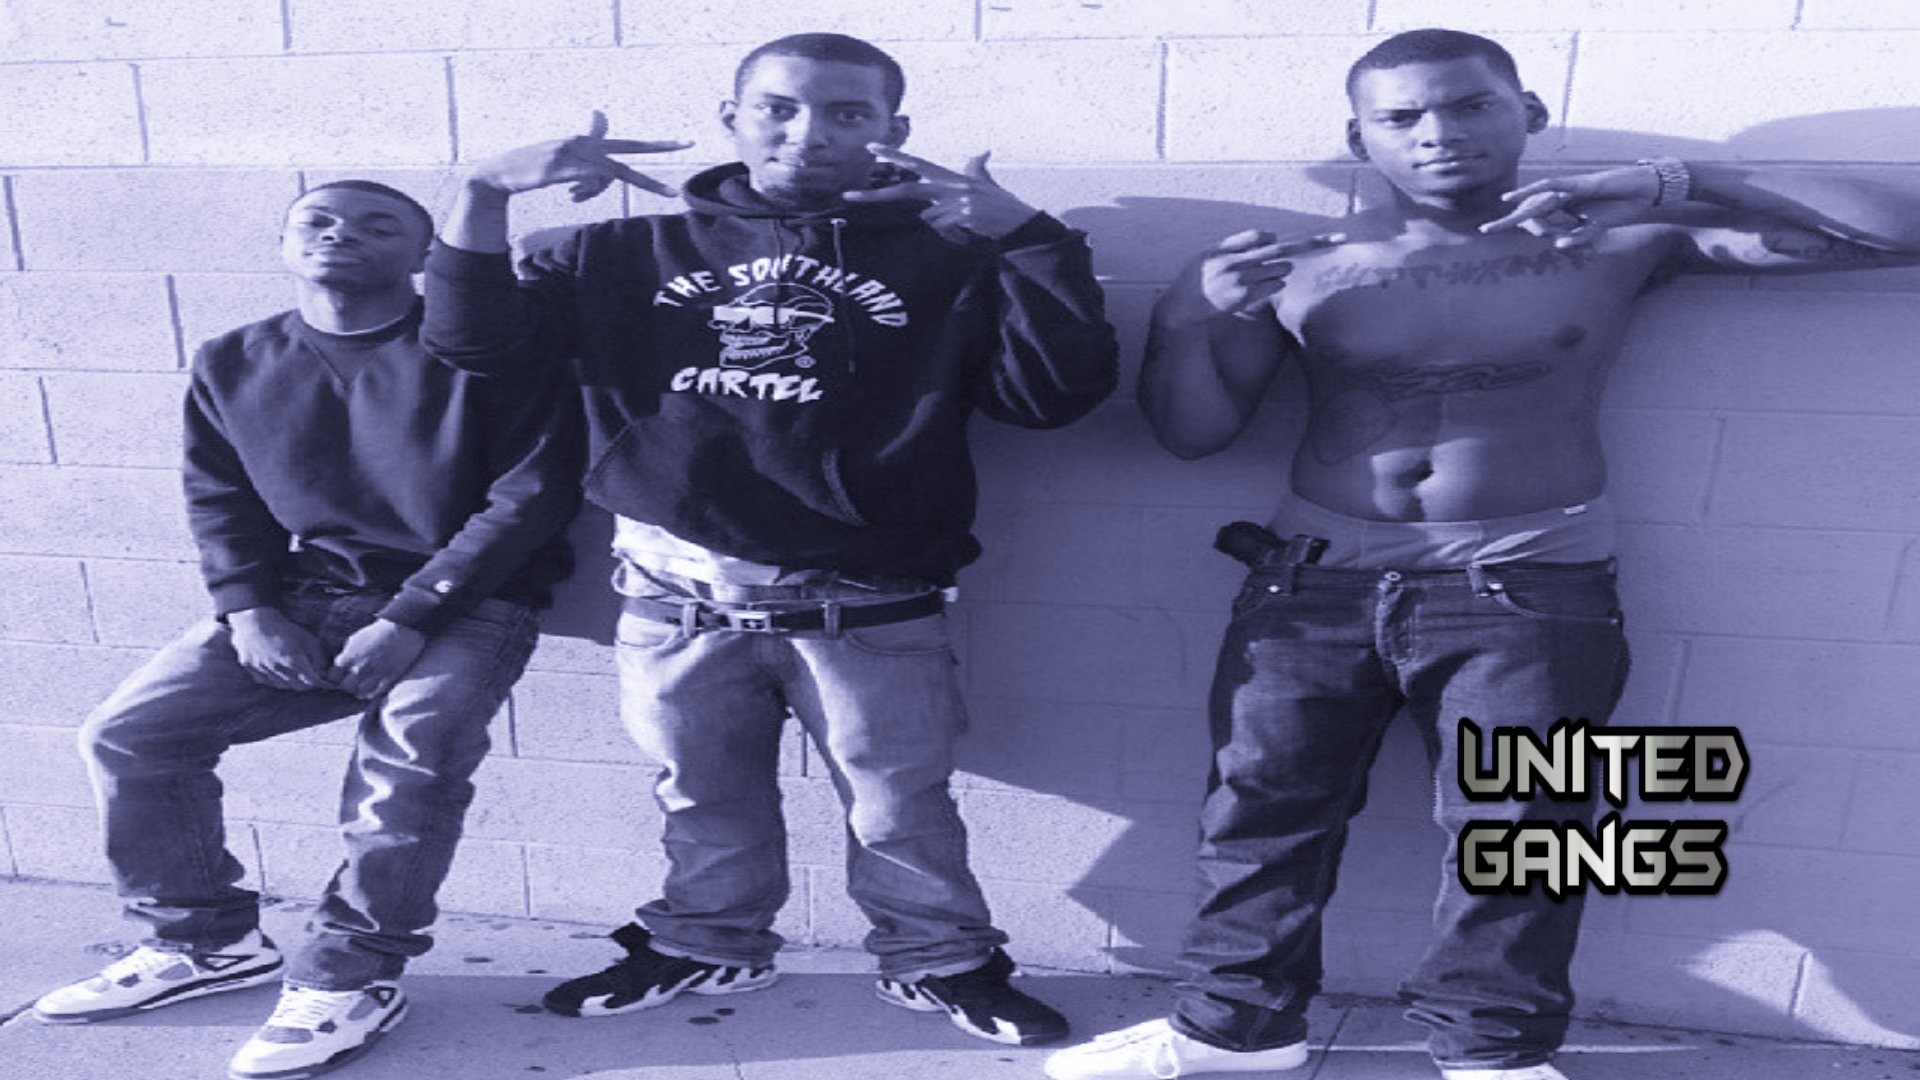 1920x1080 This page contains information about Crip gang wallpaper.